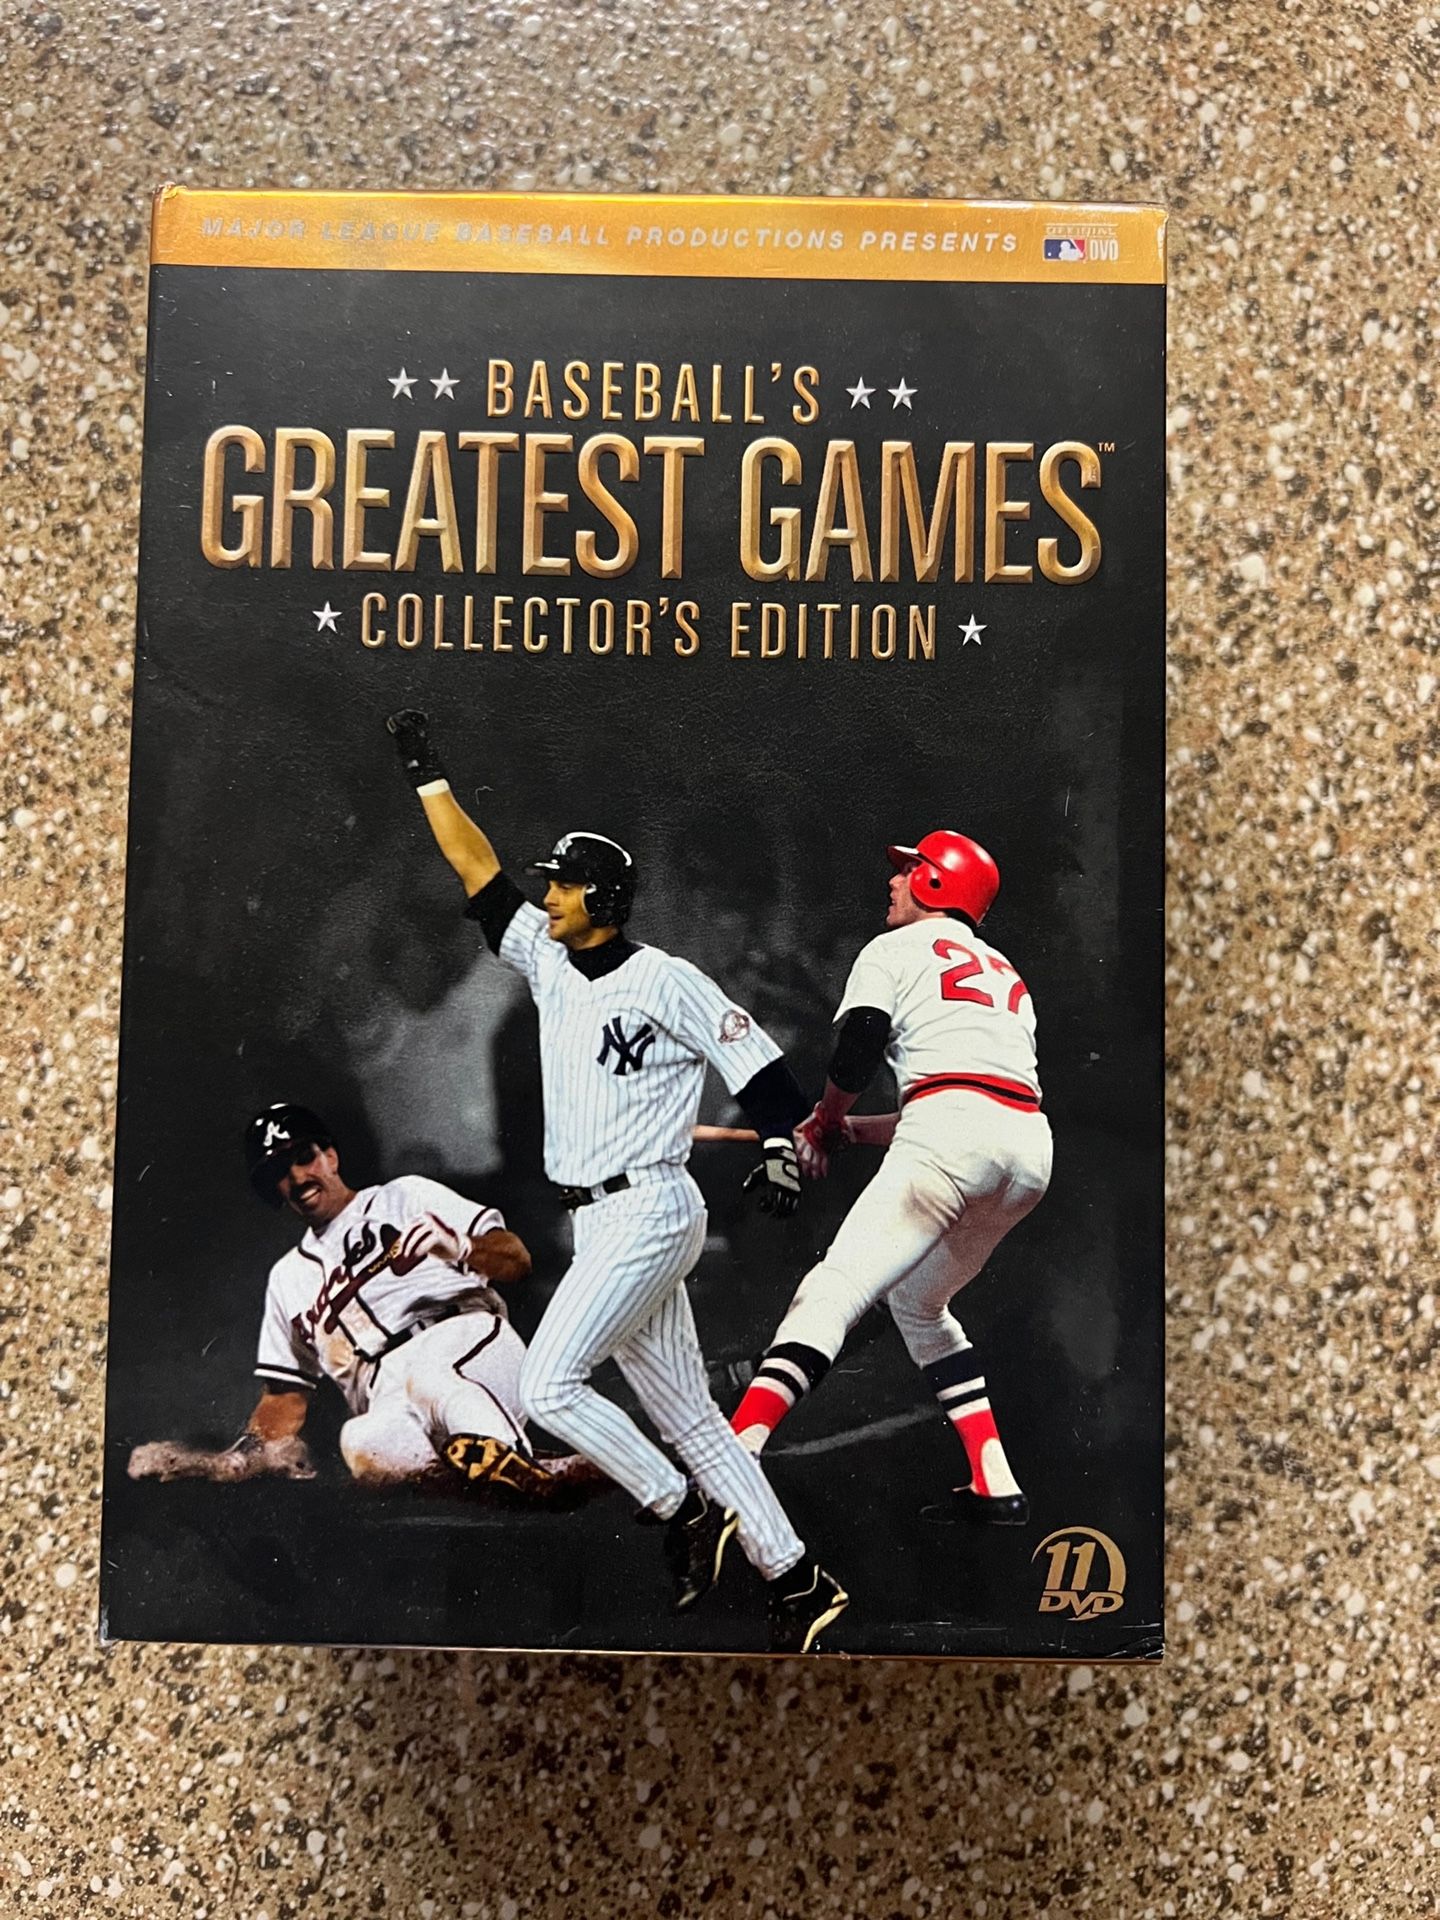 Baseball’s Greatest Games DVD collection